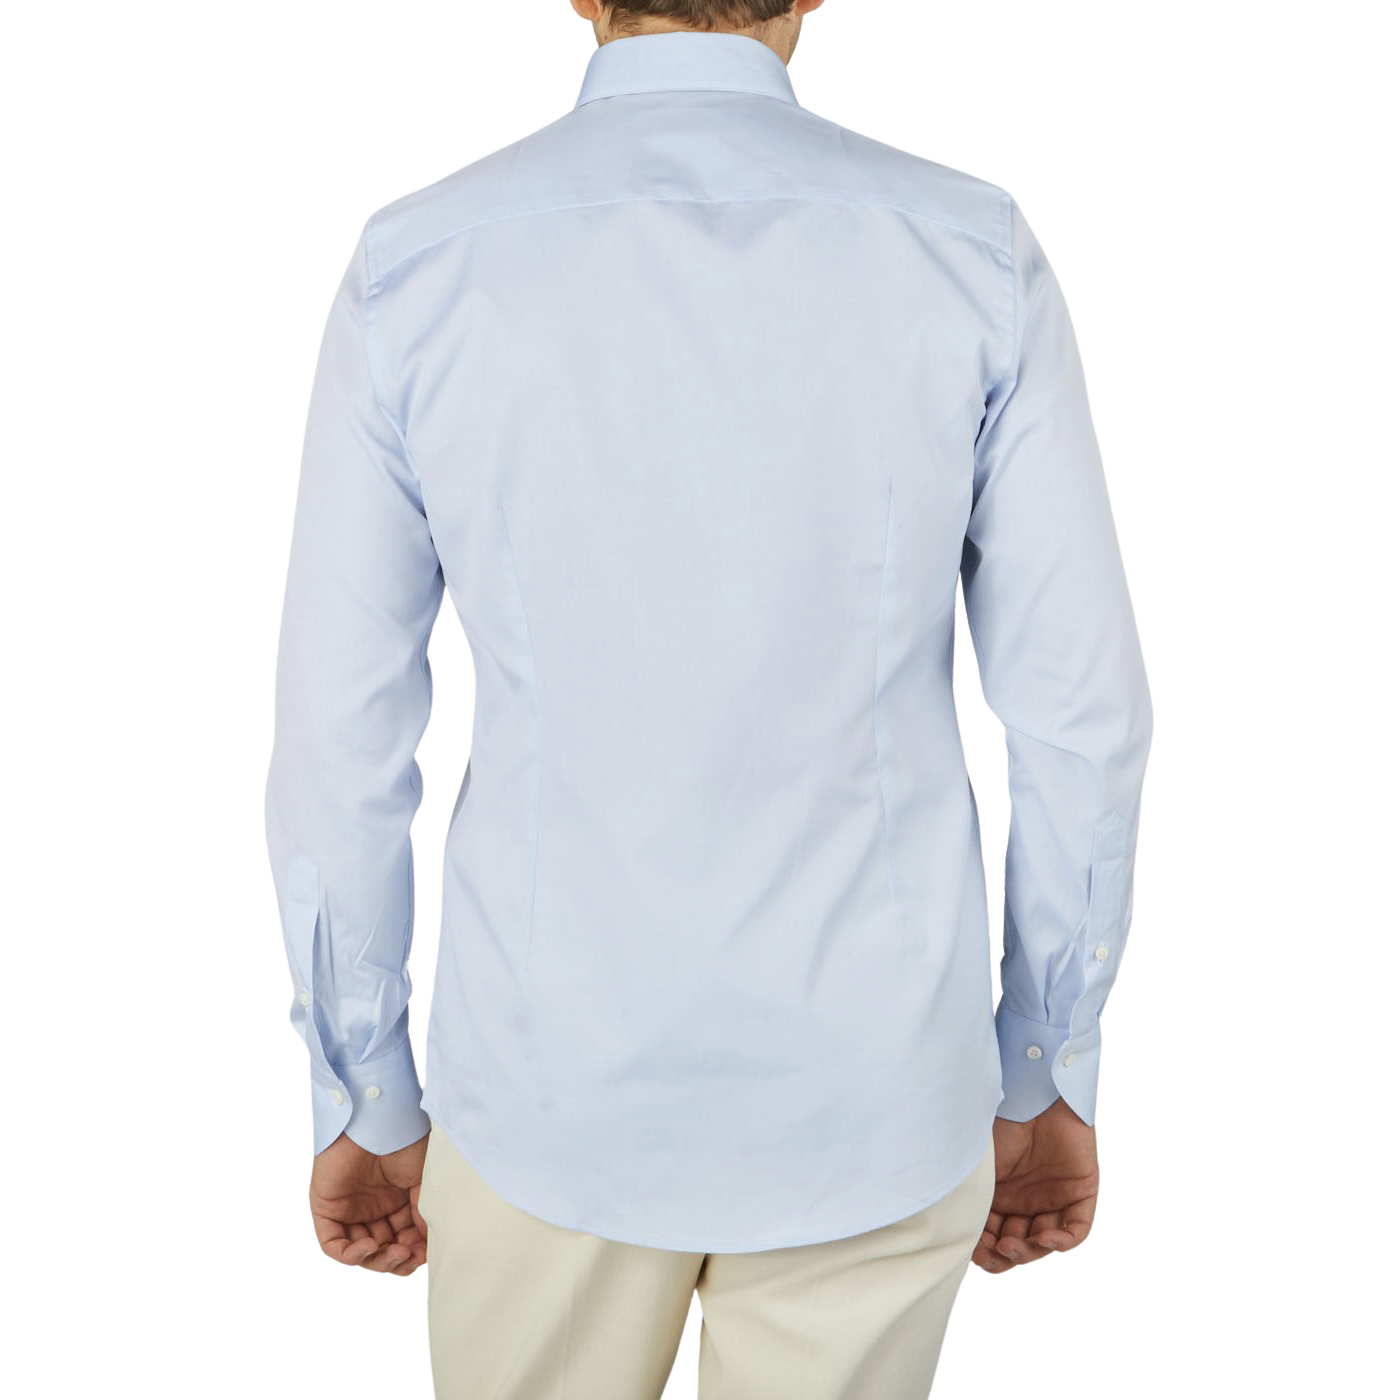 The back view of a man wearing a Light Blue Cotton Oxford BD Fitted Body Stenströms shirt.